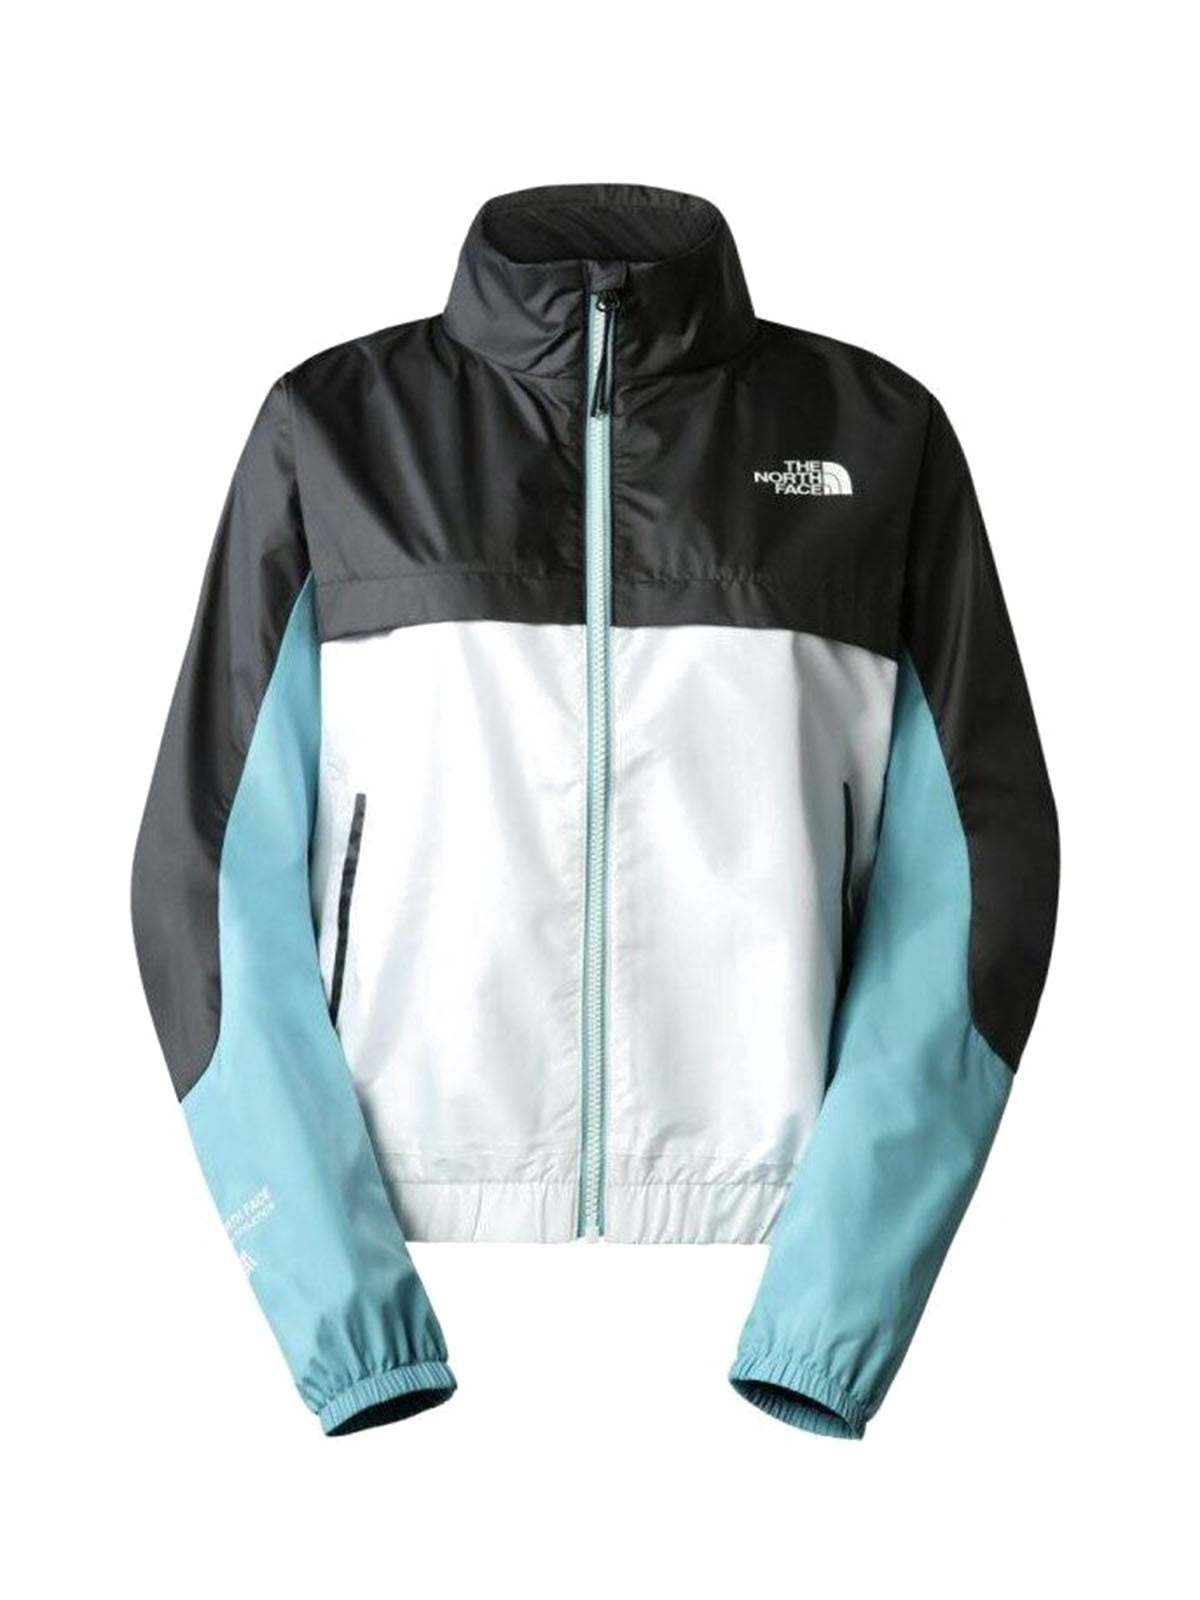 Giacche Donna The North Face - Mountain Athletics Wind Full Zip Jacket - Bianco